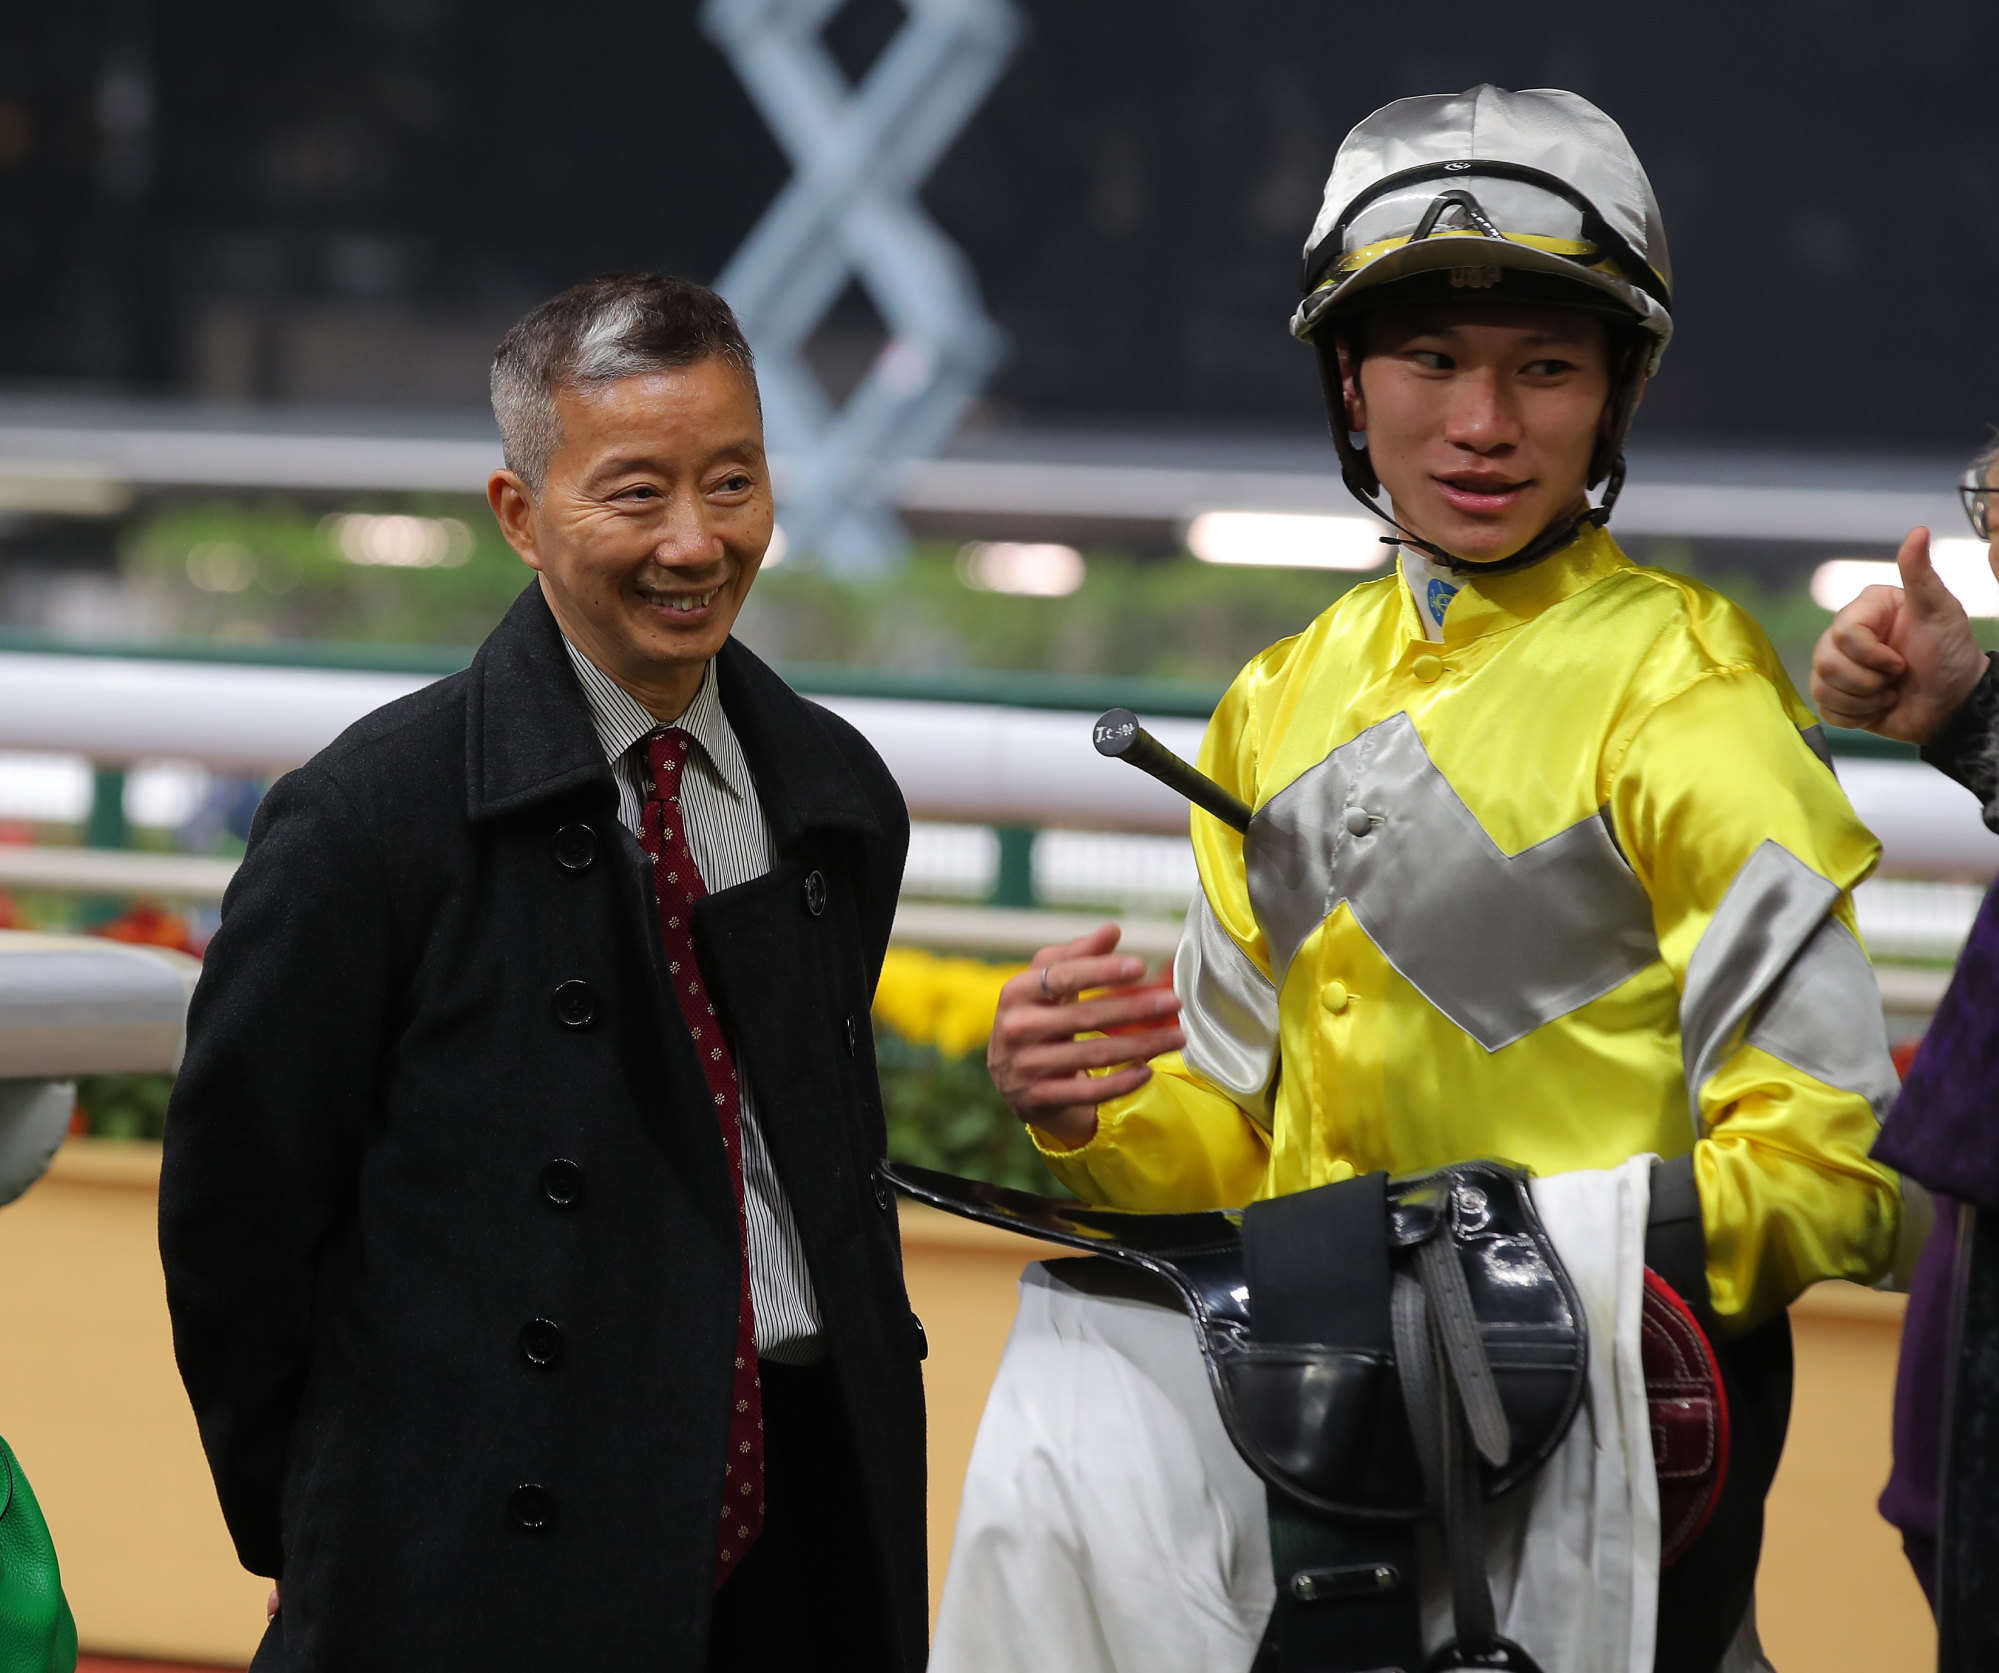 Benno Yung and Jerry Chau are all smiles after Super Joy N Fun’s latest win.